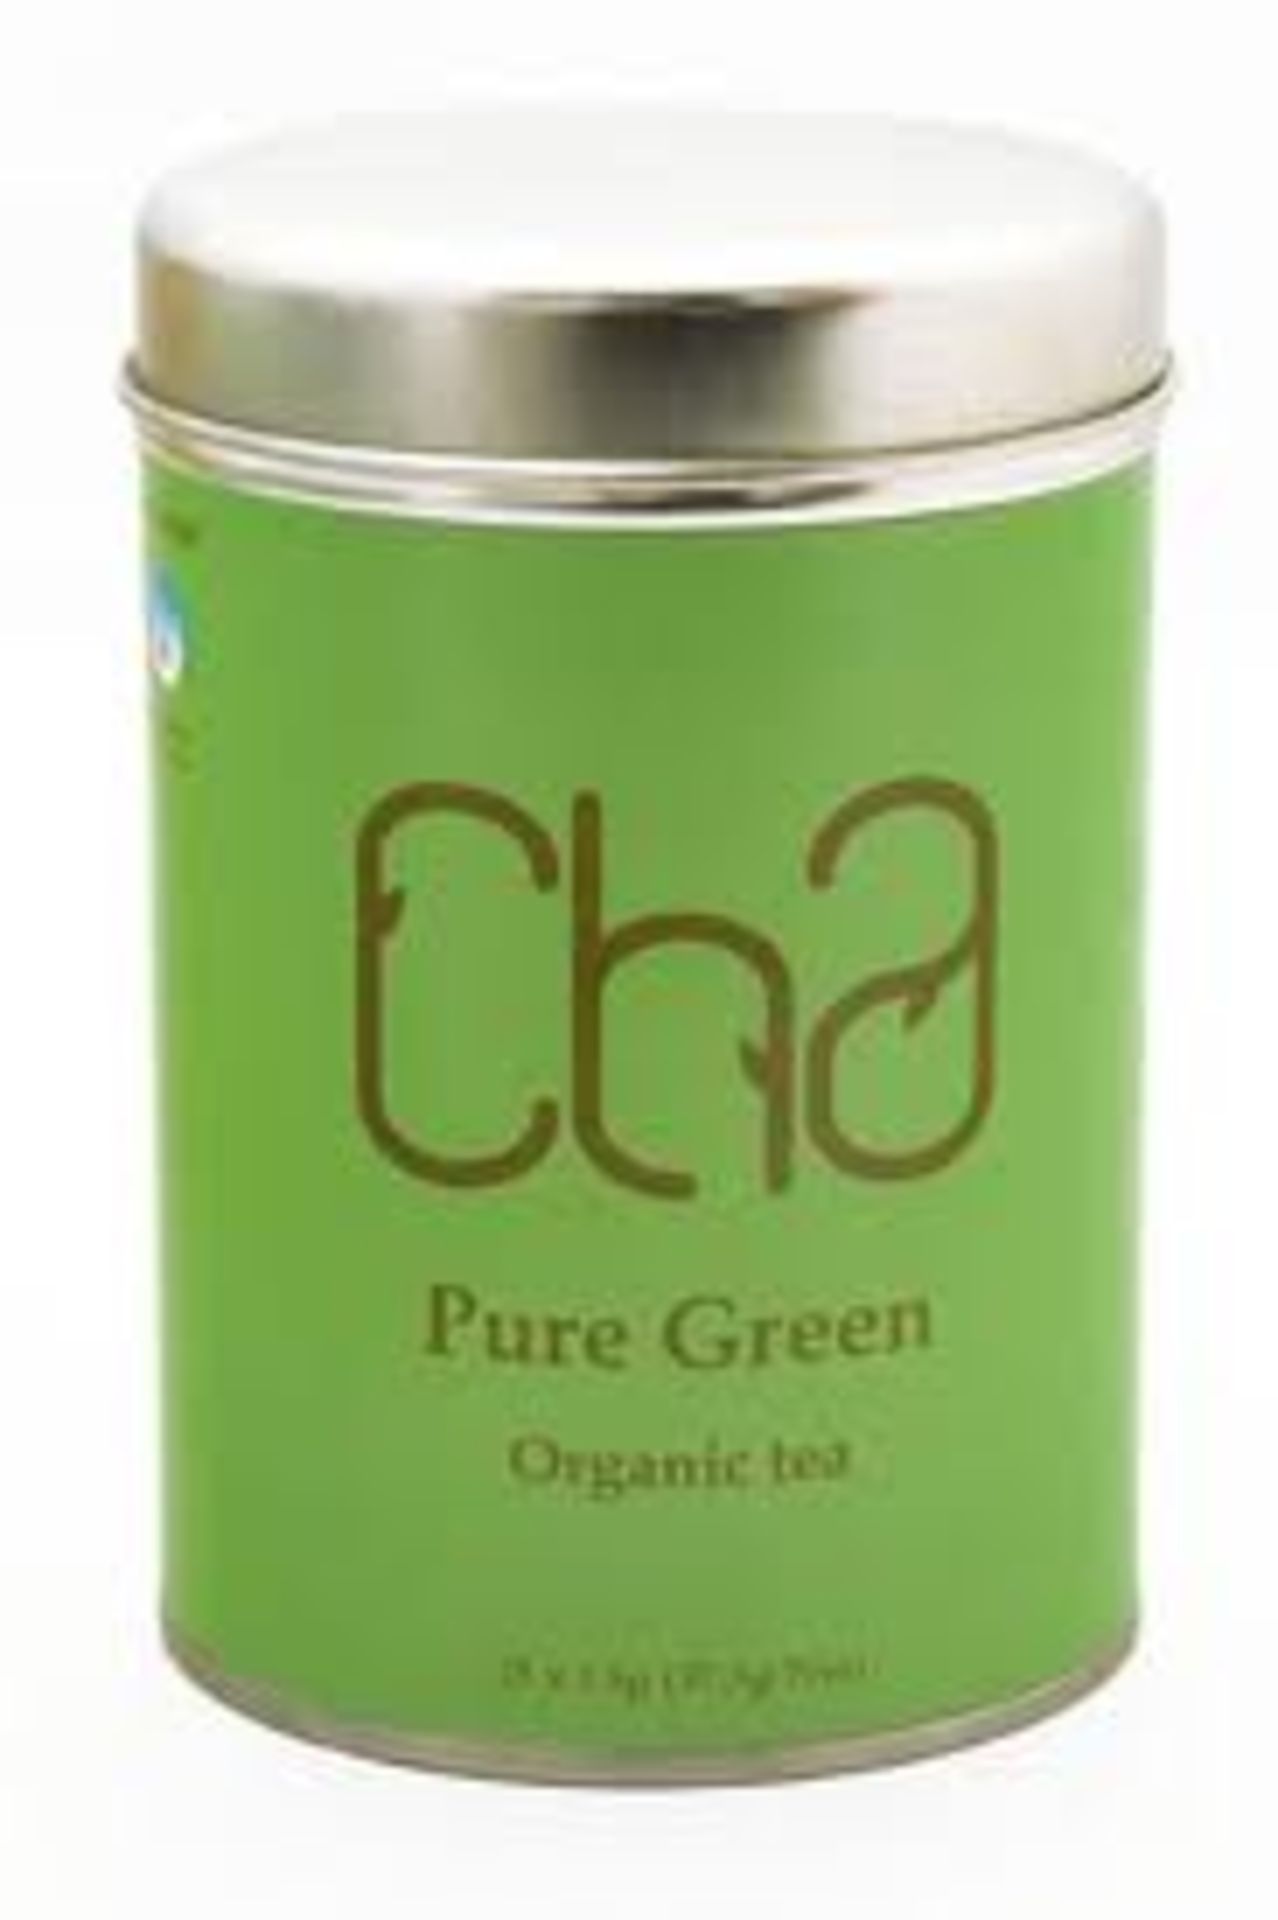 Resale Pallet - 1,200 x Tins of CHA Organic Tea - PURE GREEN - 100% Natural and Organic - Includes